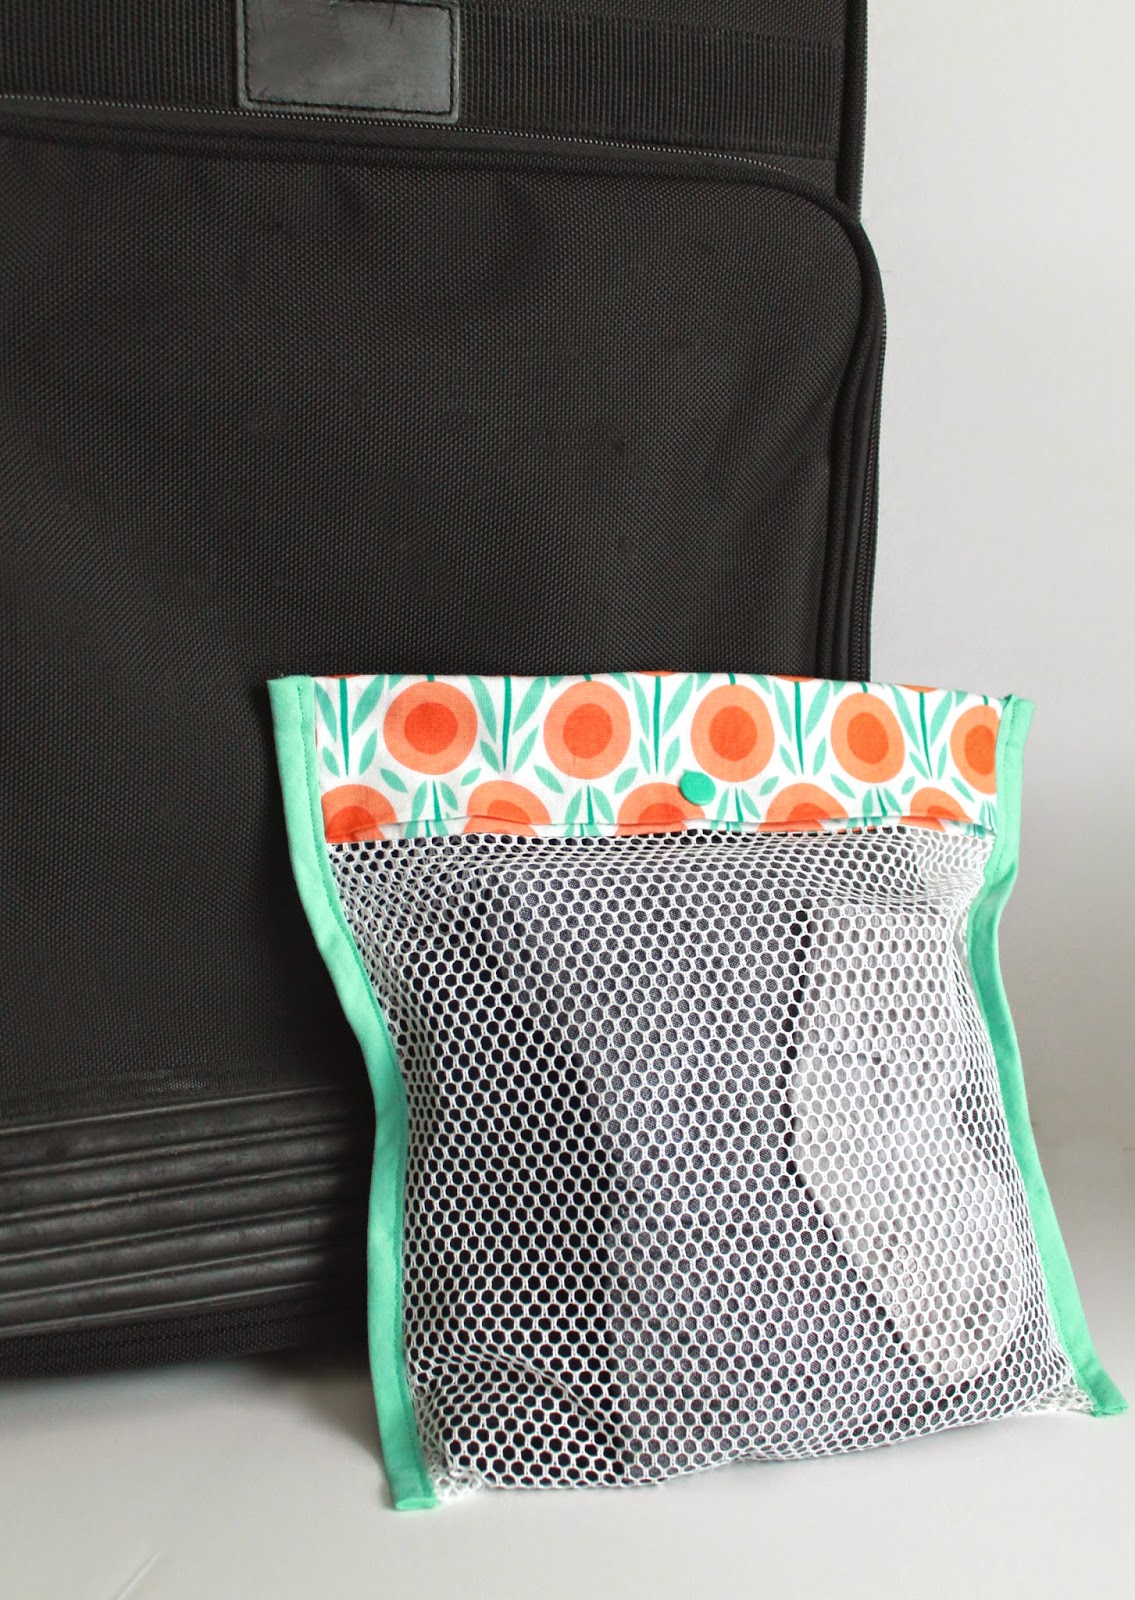 Simple Mesh Bag Tutorial: great for produce or organizing! | Step by step directions how to sew a mesh bag with a simple fold-over closure, no zipper. | The Inspired Wren